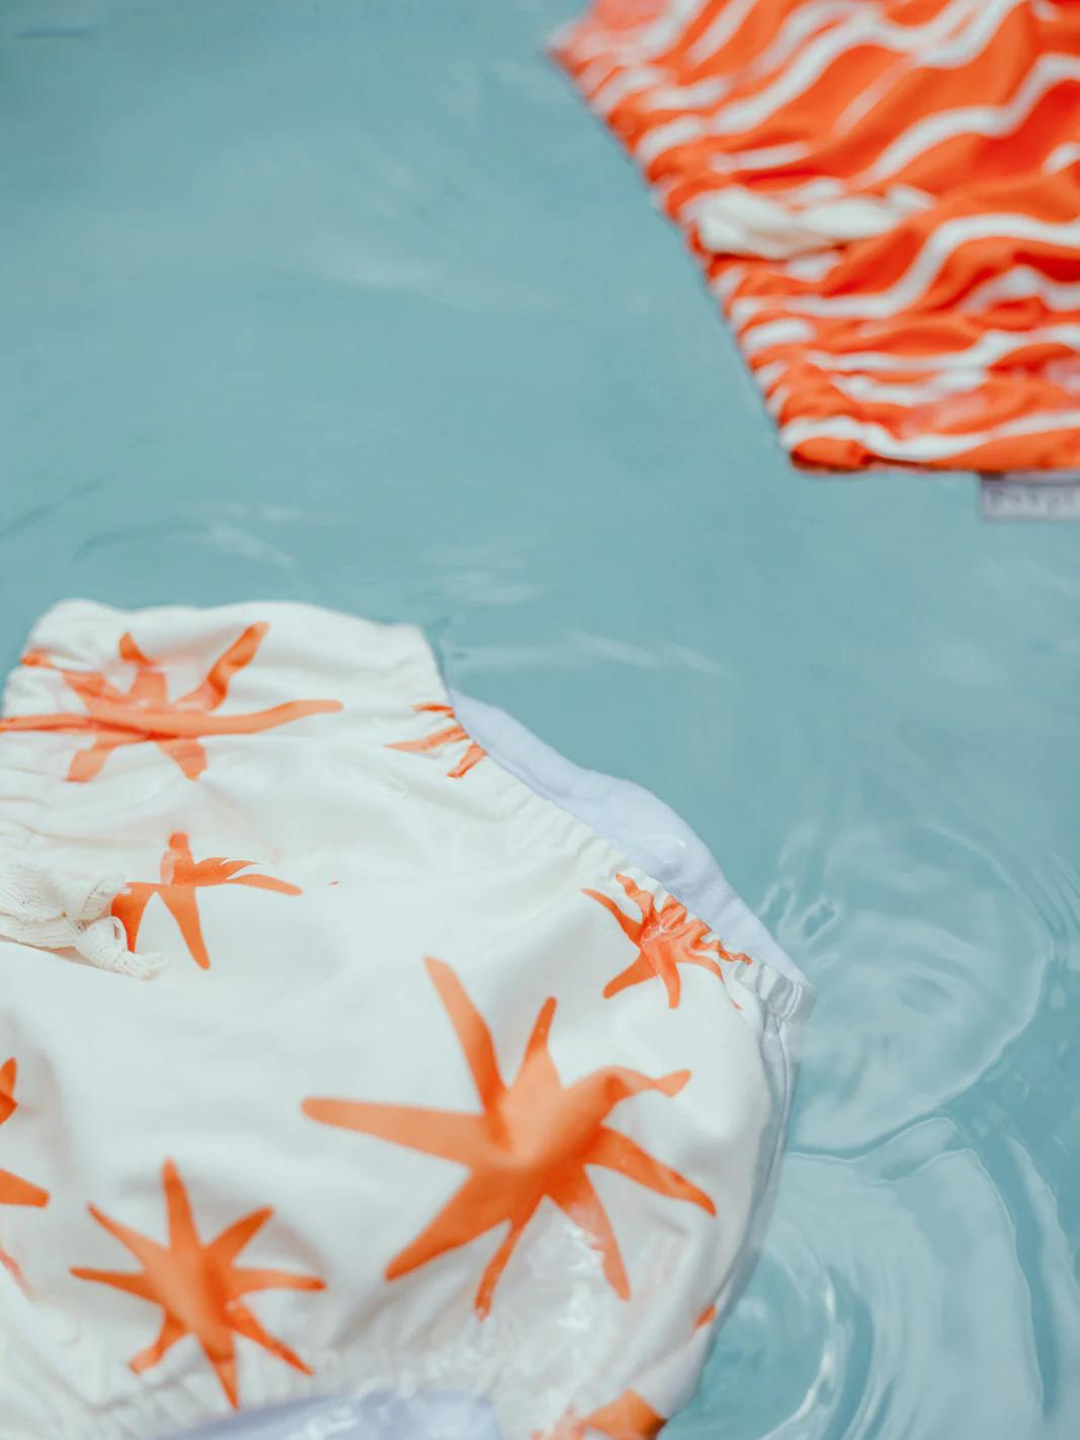 The front view of the swim diaper with an elastic waist with a tie and elastic leg holes. The diaper is a cream color with orange stars shapes all over. It is floating in a pool with the Spaghetti Swim Diaper.